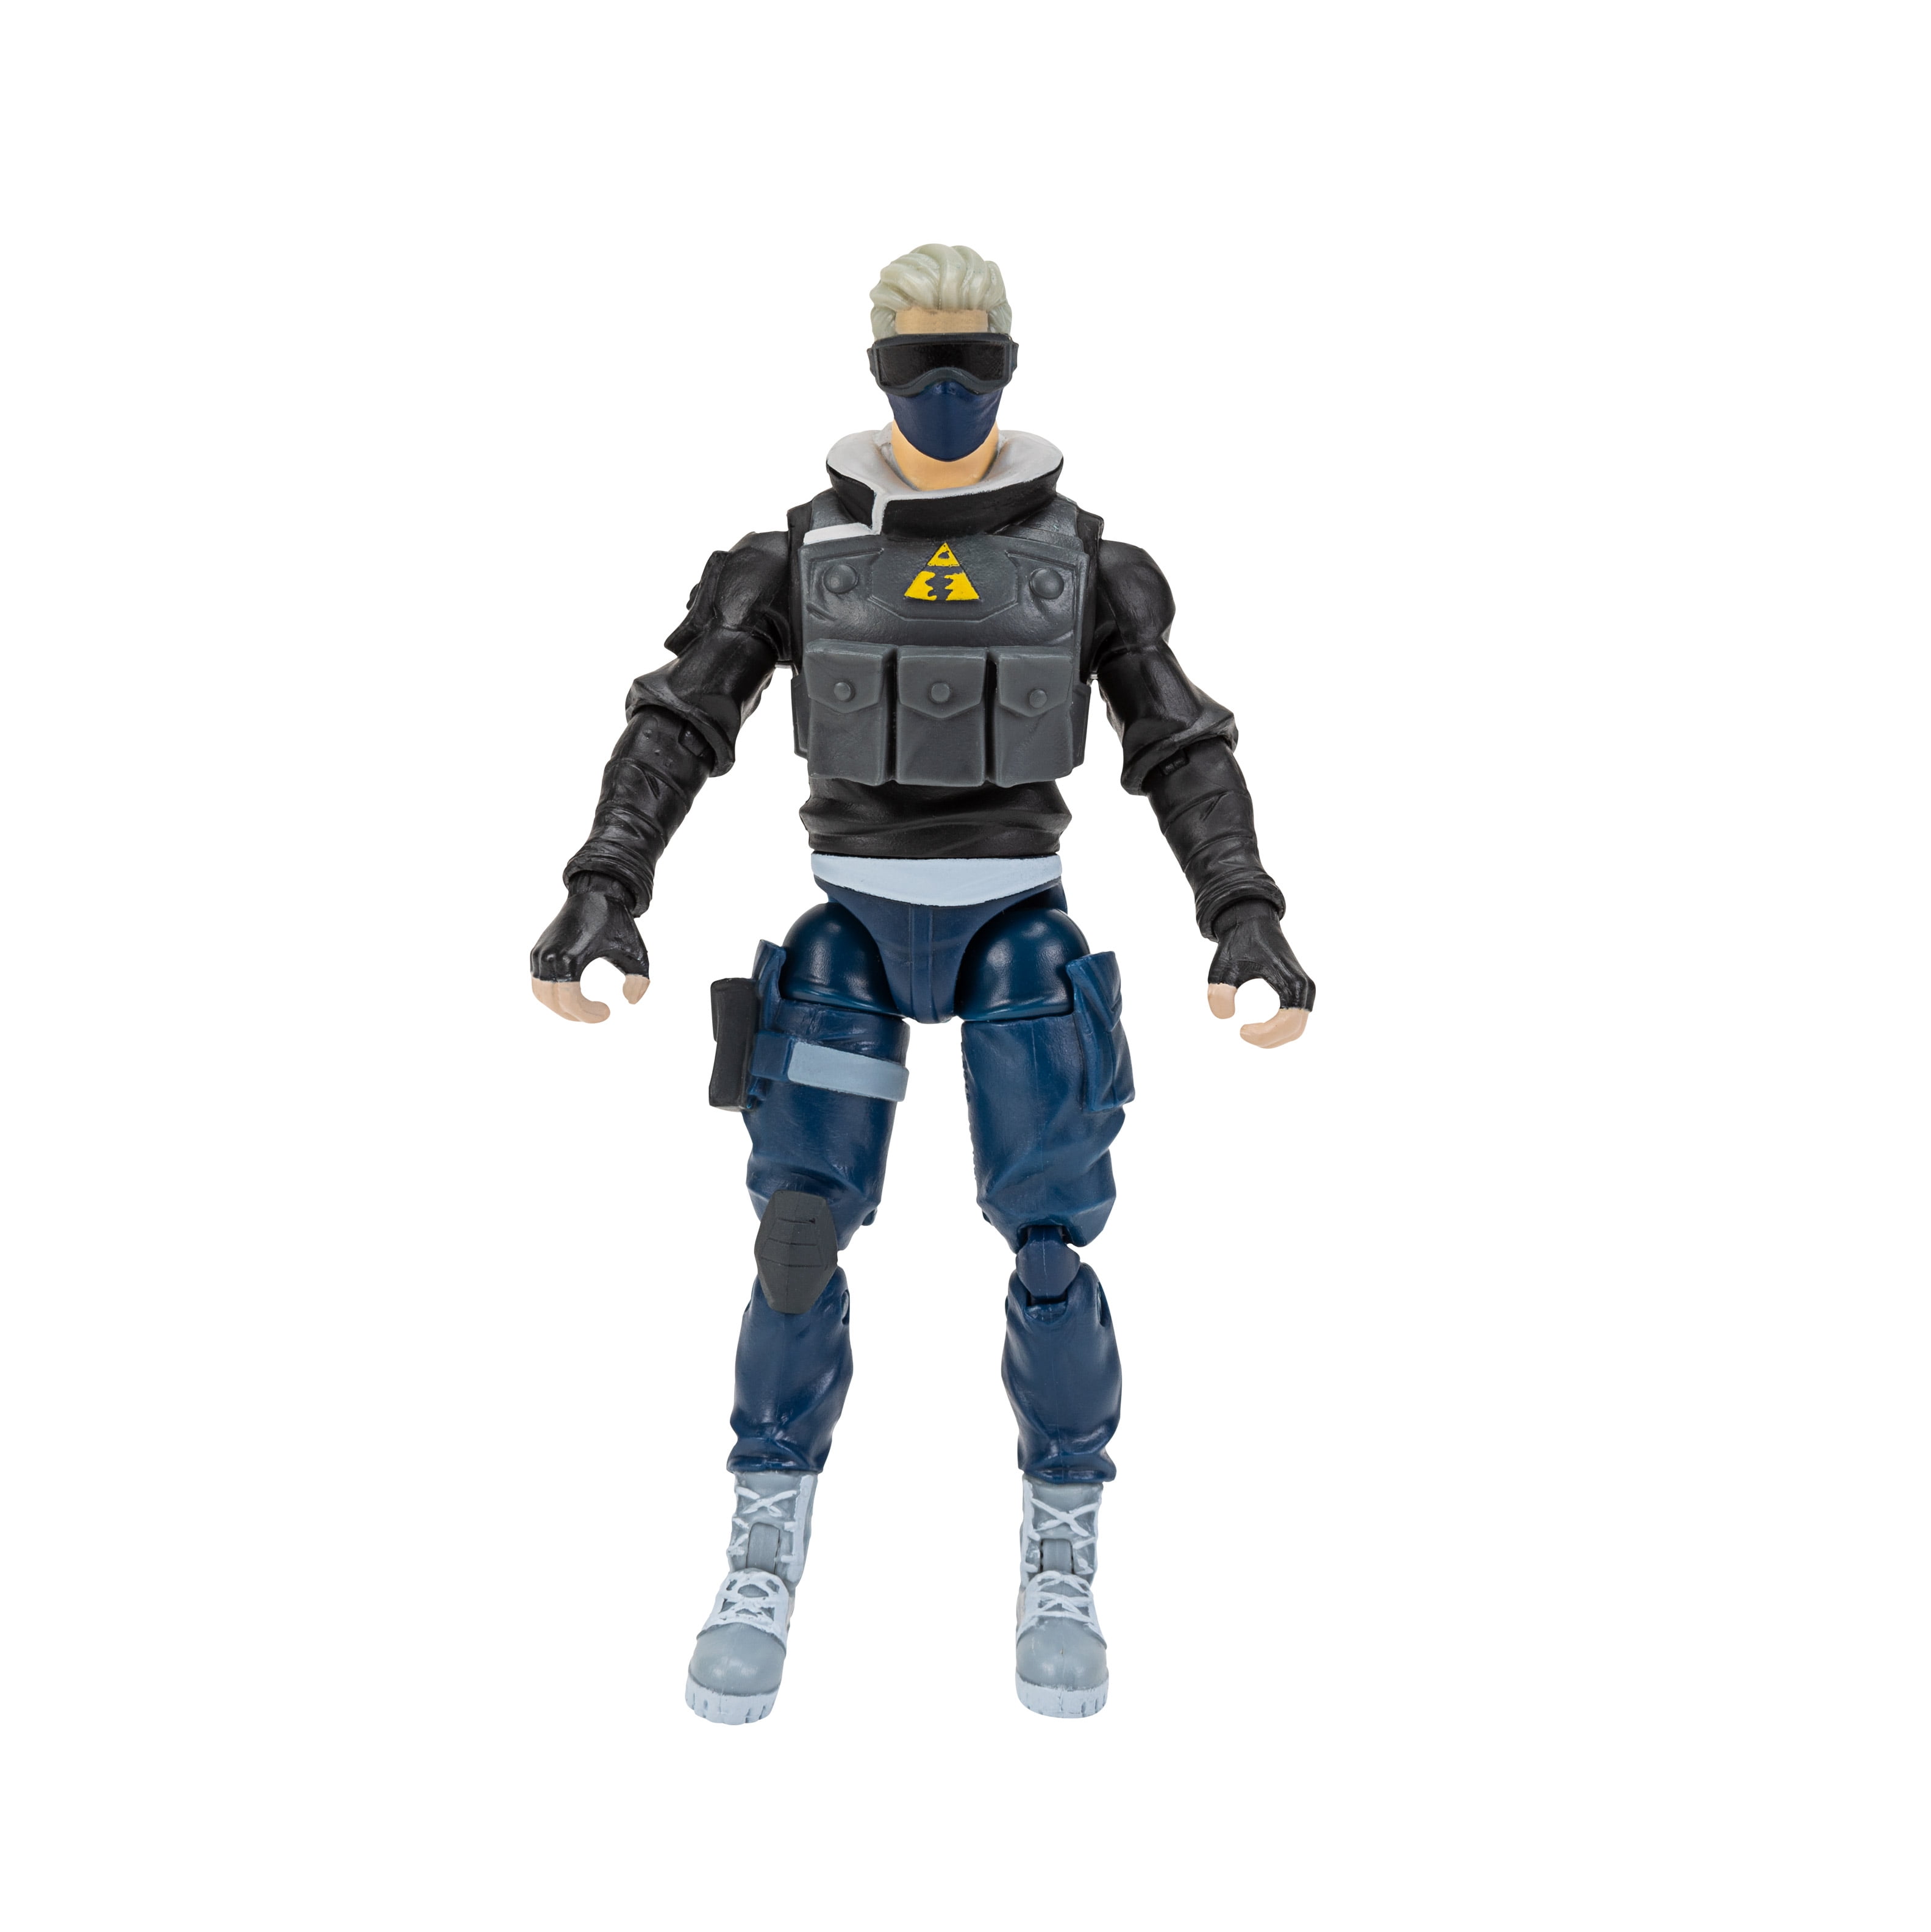 Special Soldier minifigure Fortnite Video Game TV show movie  toy figure